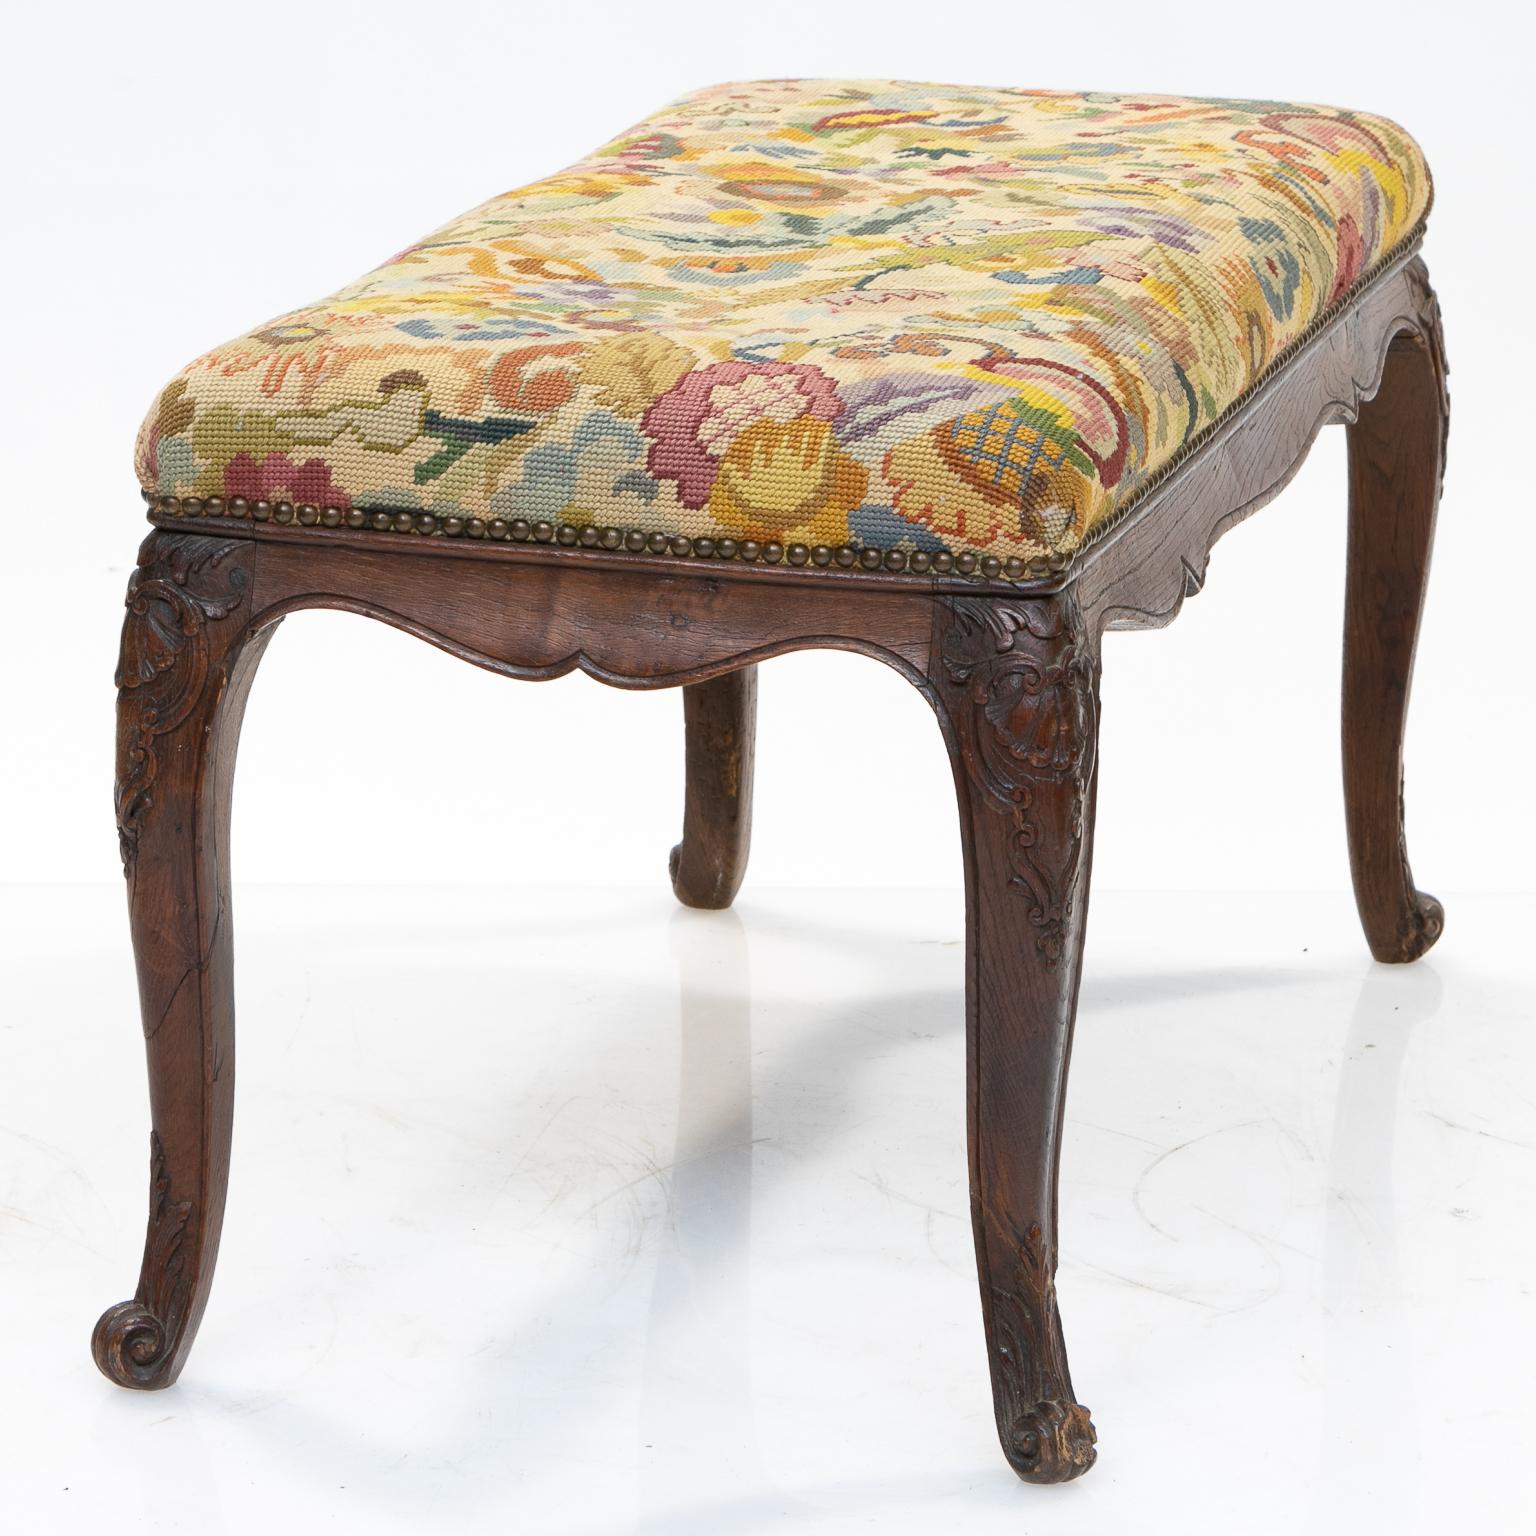 Late 19th Century 19th Century French Needlepoint Tapestry Bench